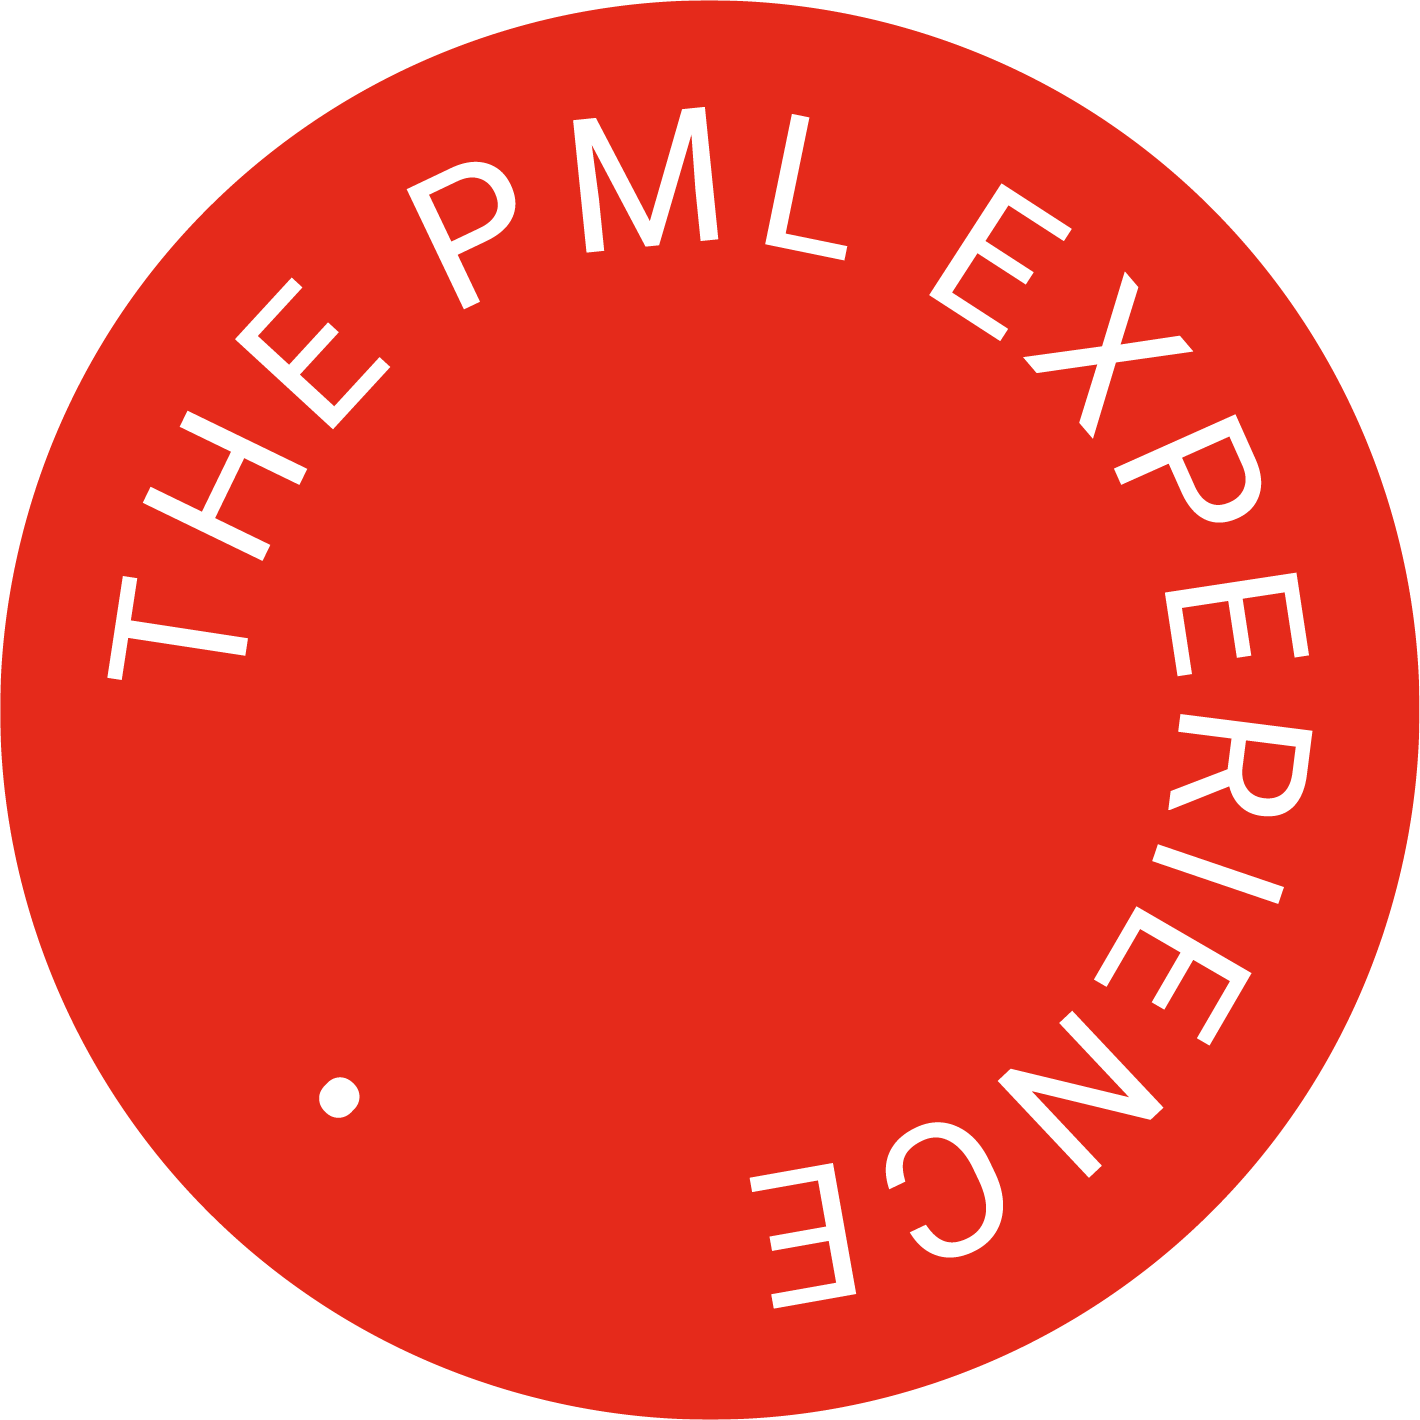 The PML Experience